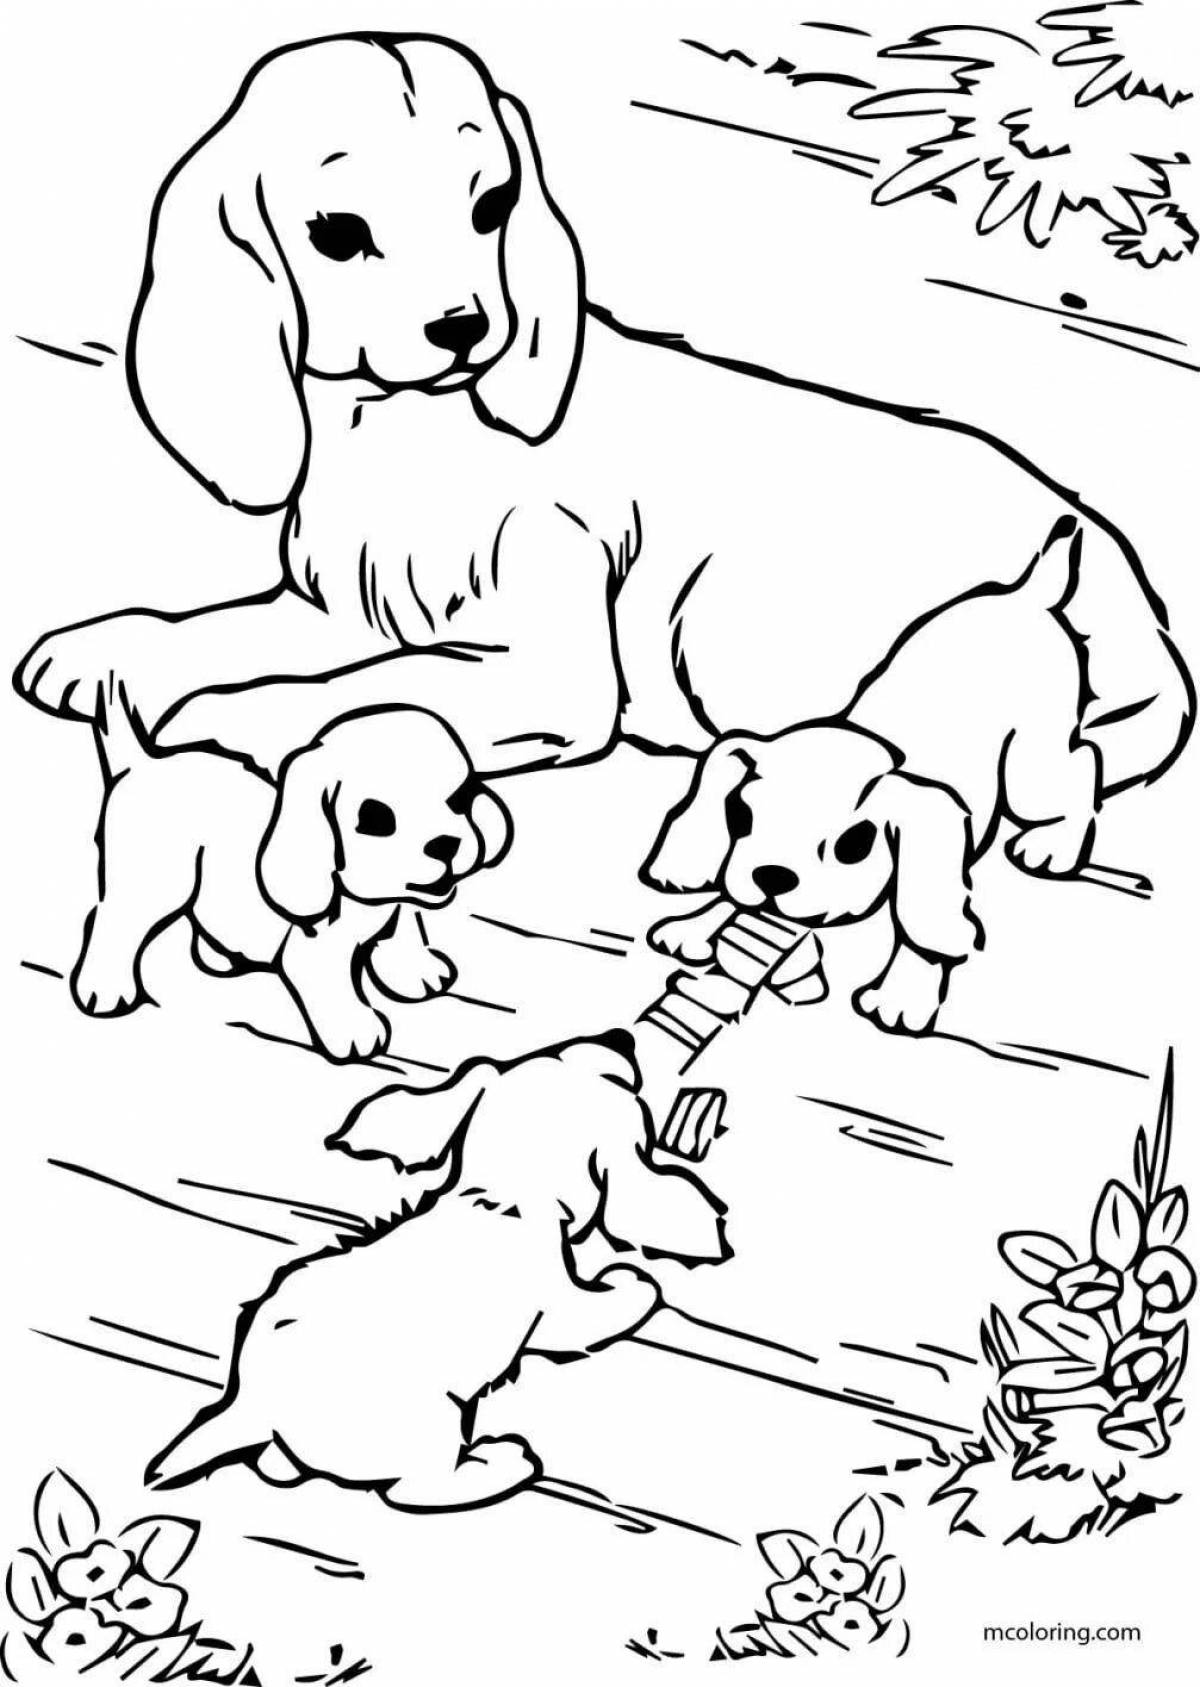 Nice coloring pages of pets and their babies